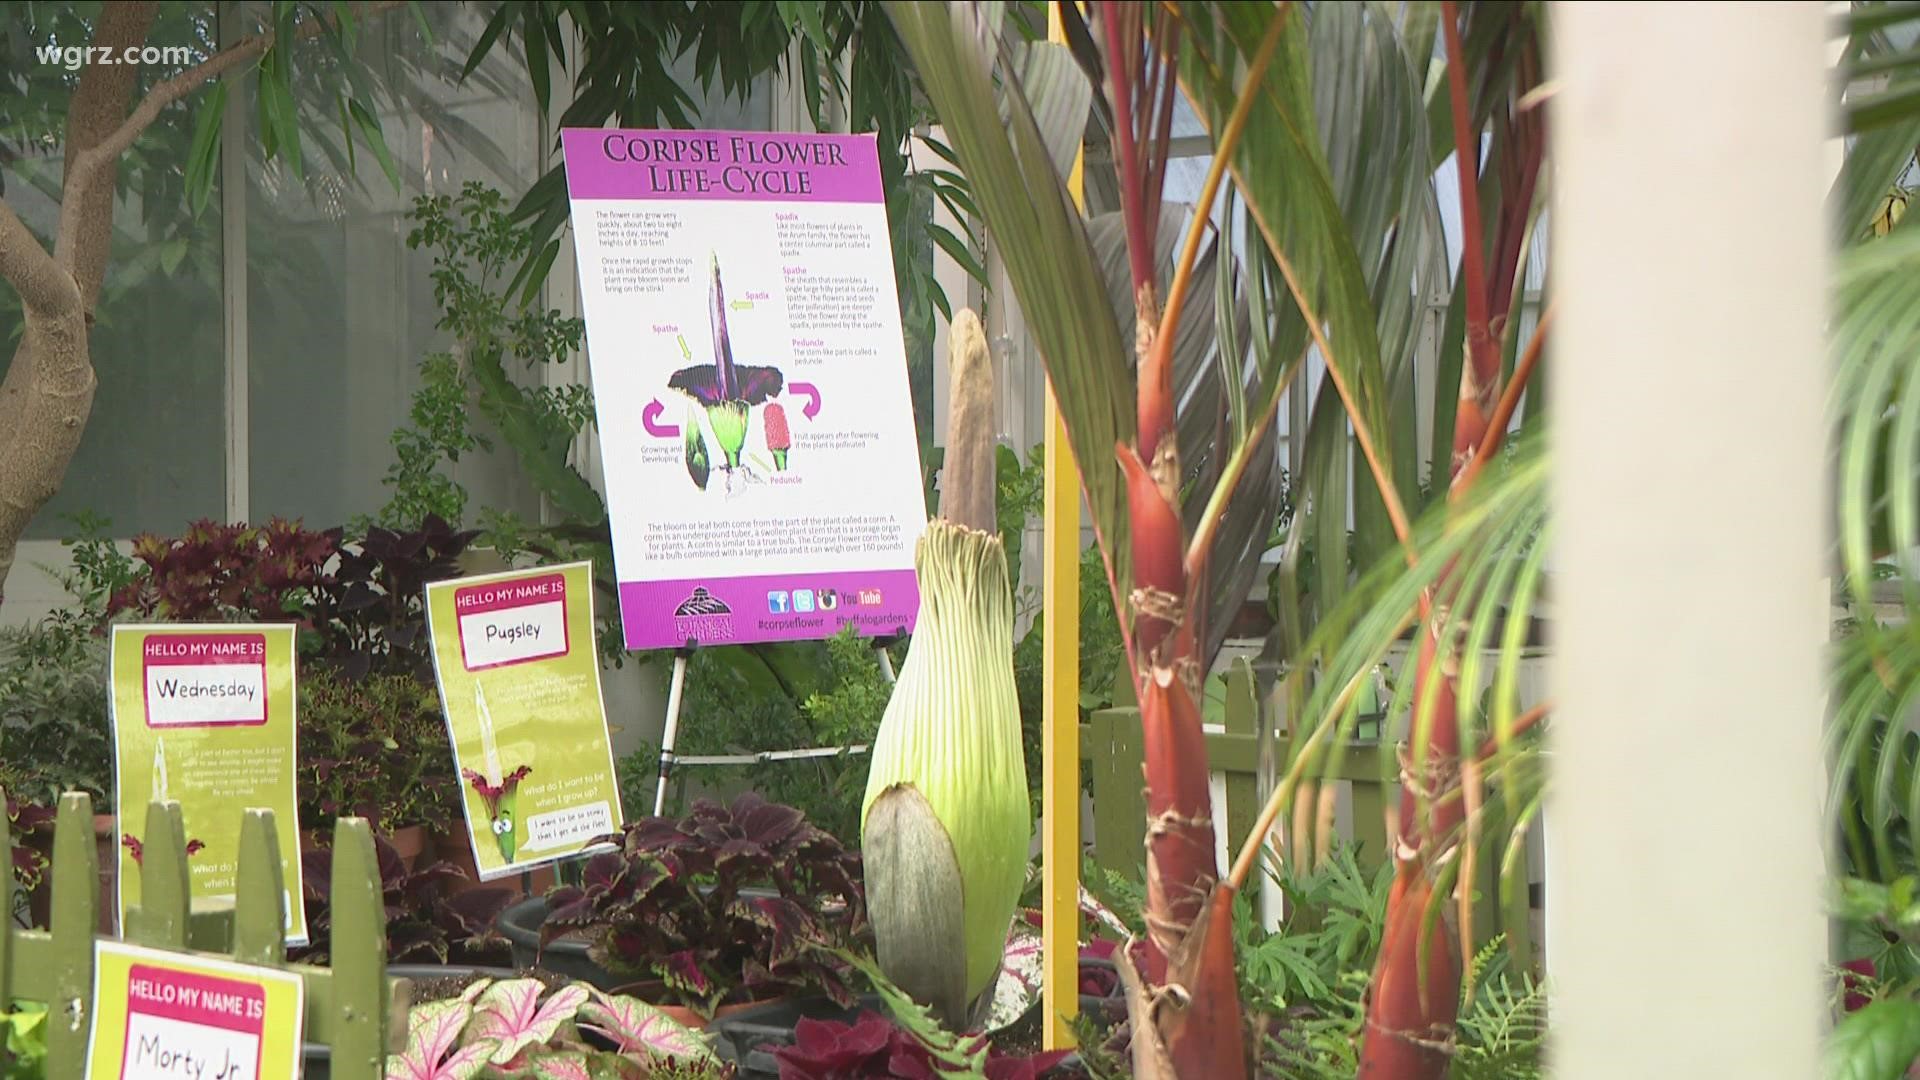 Morty Jr., the Corpse Flower to bloom soon at The Botanical gardens